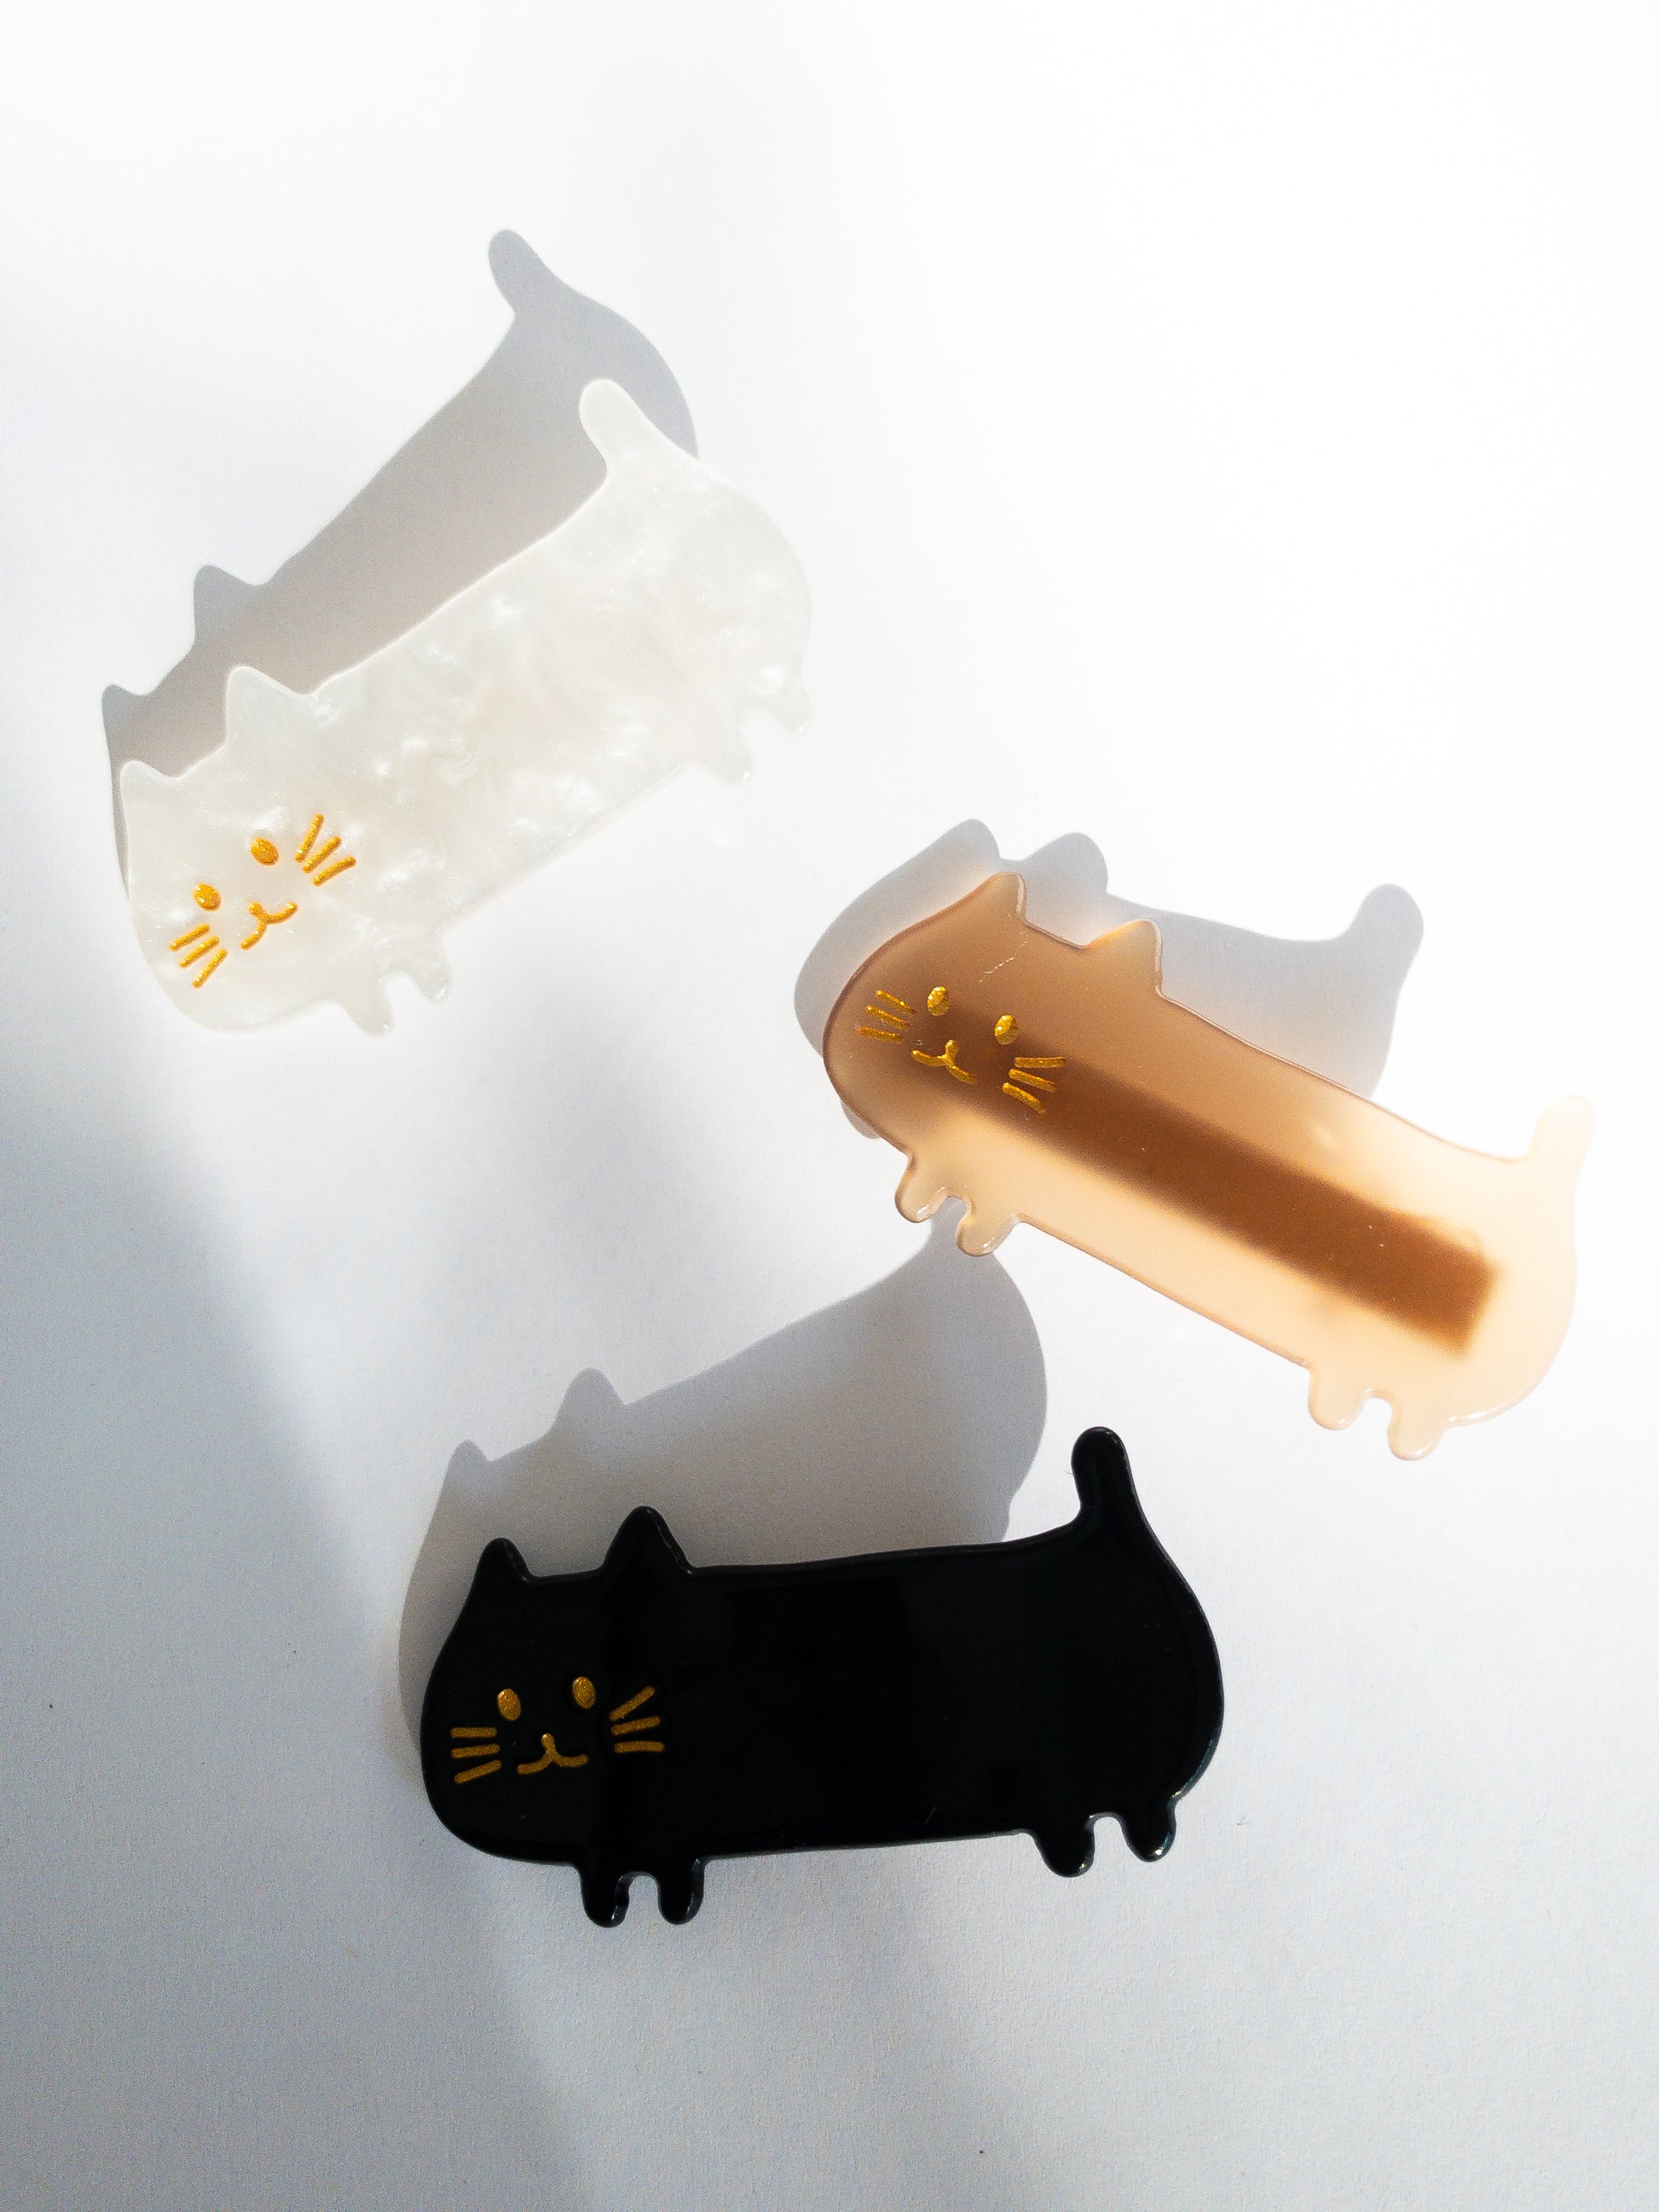 Do not fear, the meow crew is here! Long, slinky, happy cat hair clips in light brown, midnight black and shimmery, swirly white.